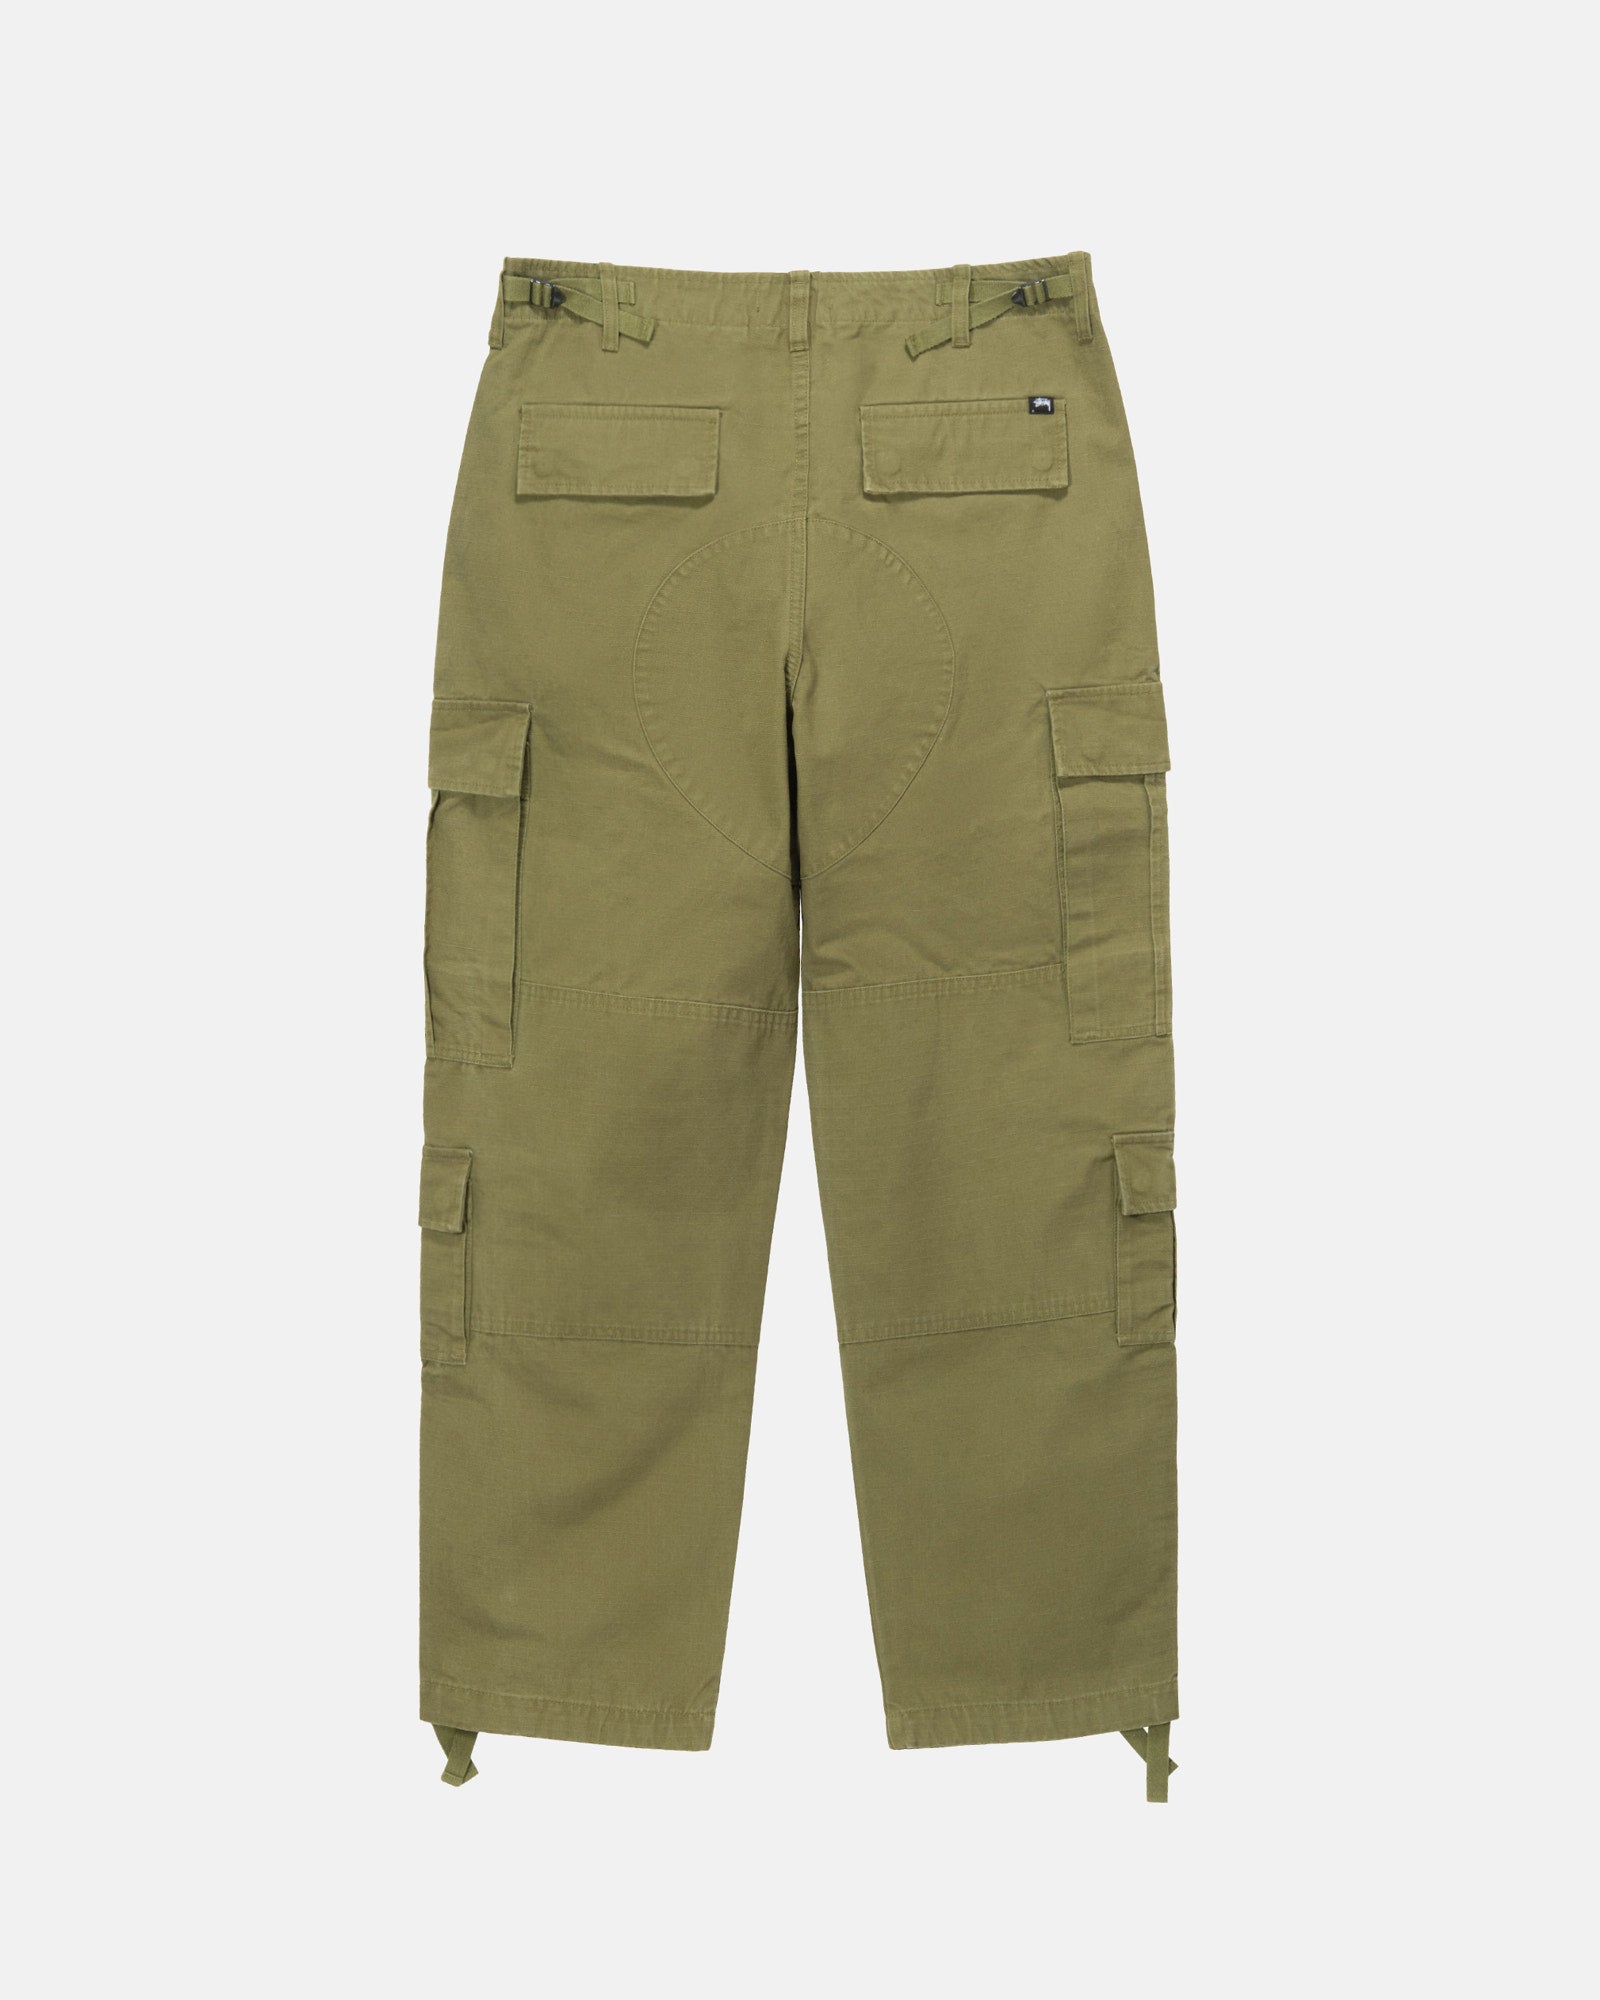 Rothco Vintage Camo Paratrooper Fatigue Pants - Olive Drab With Woodla – PX  Supply, LLC